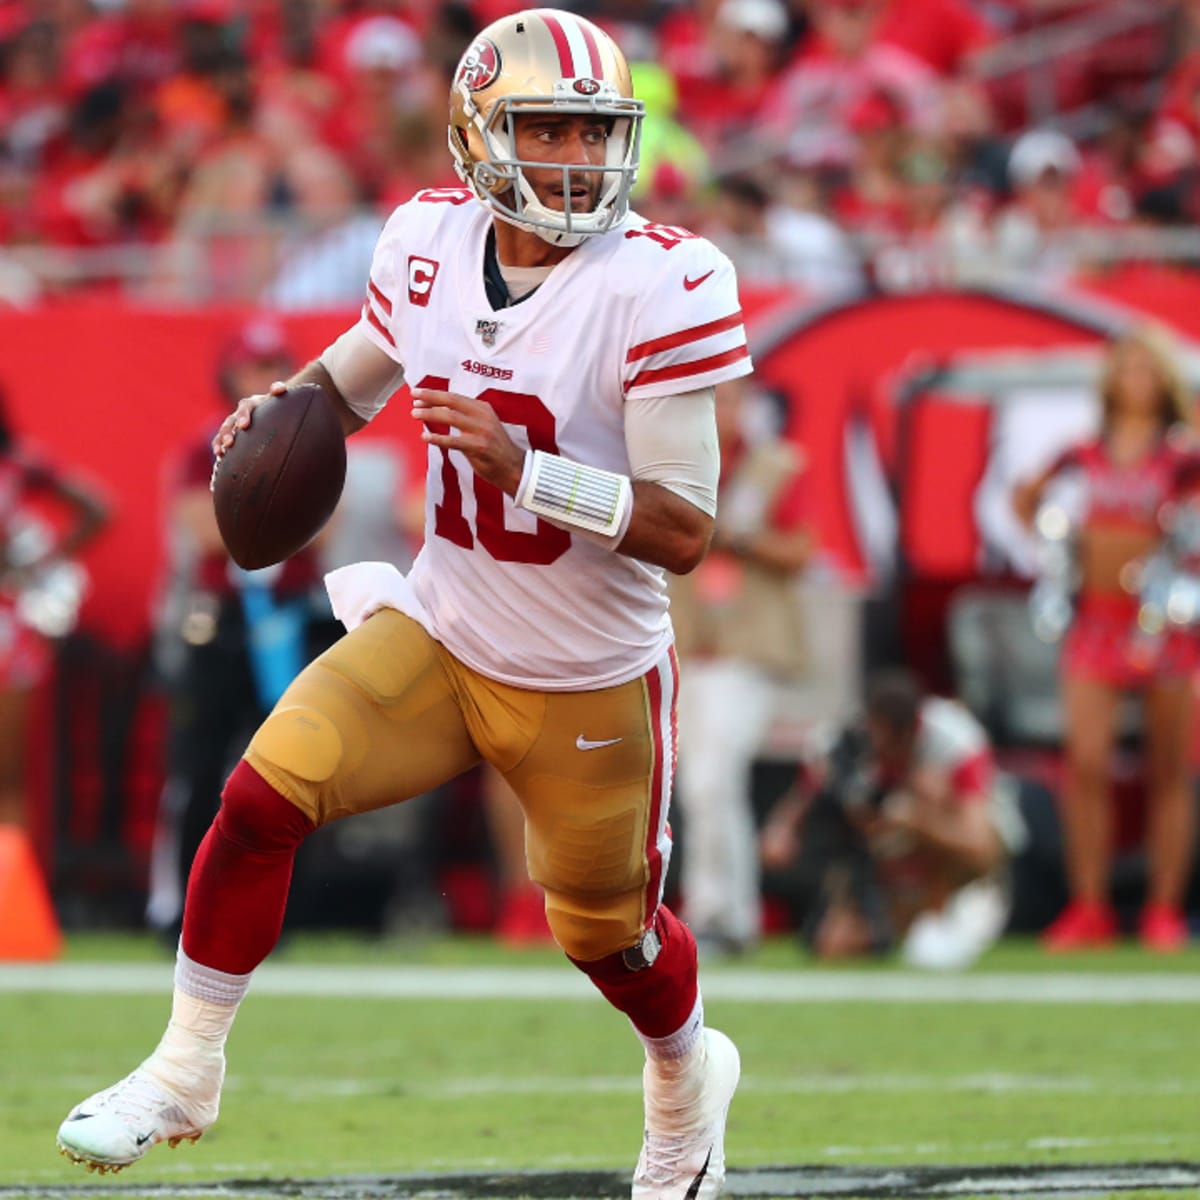 NFL insider gives update on Buccaneers pursuit of Jimmy Garoppolo